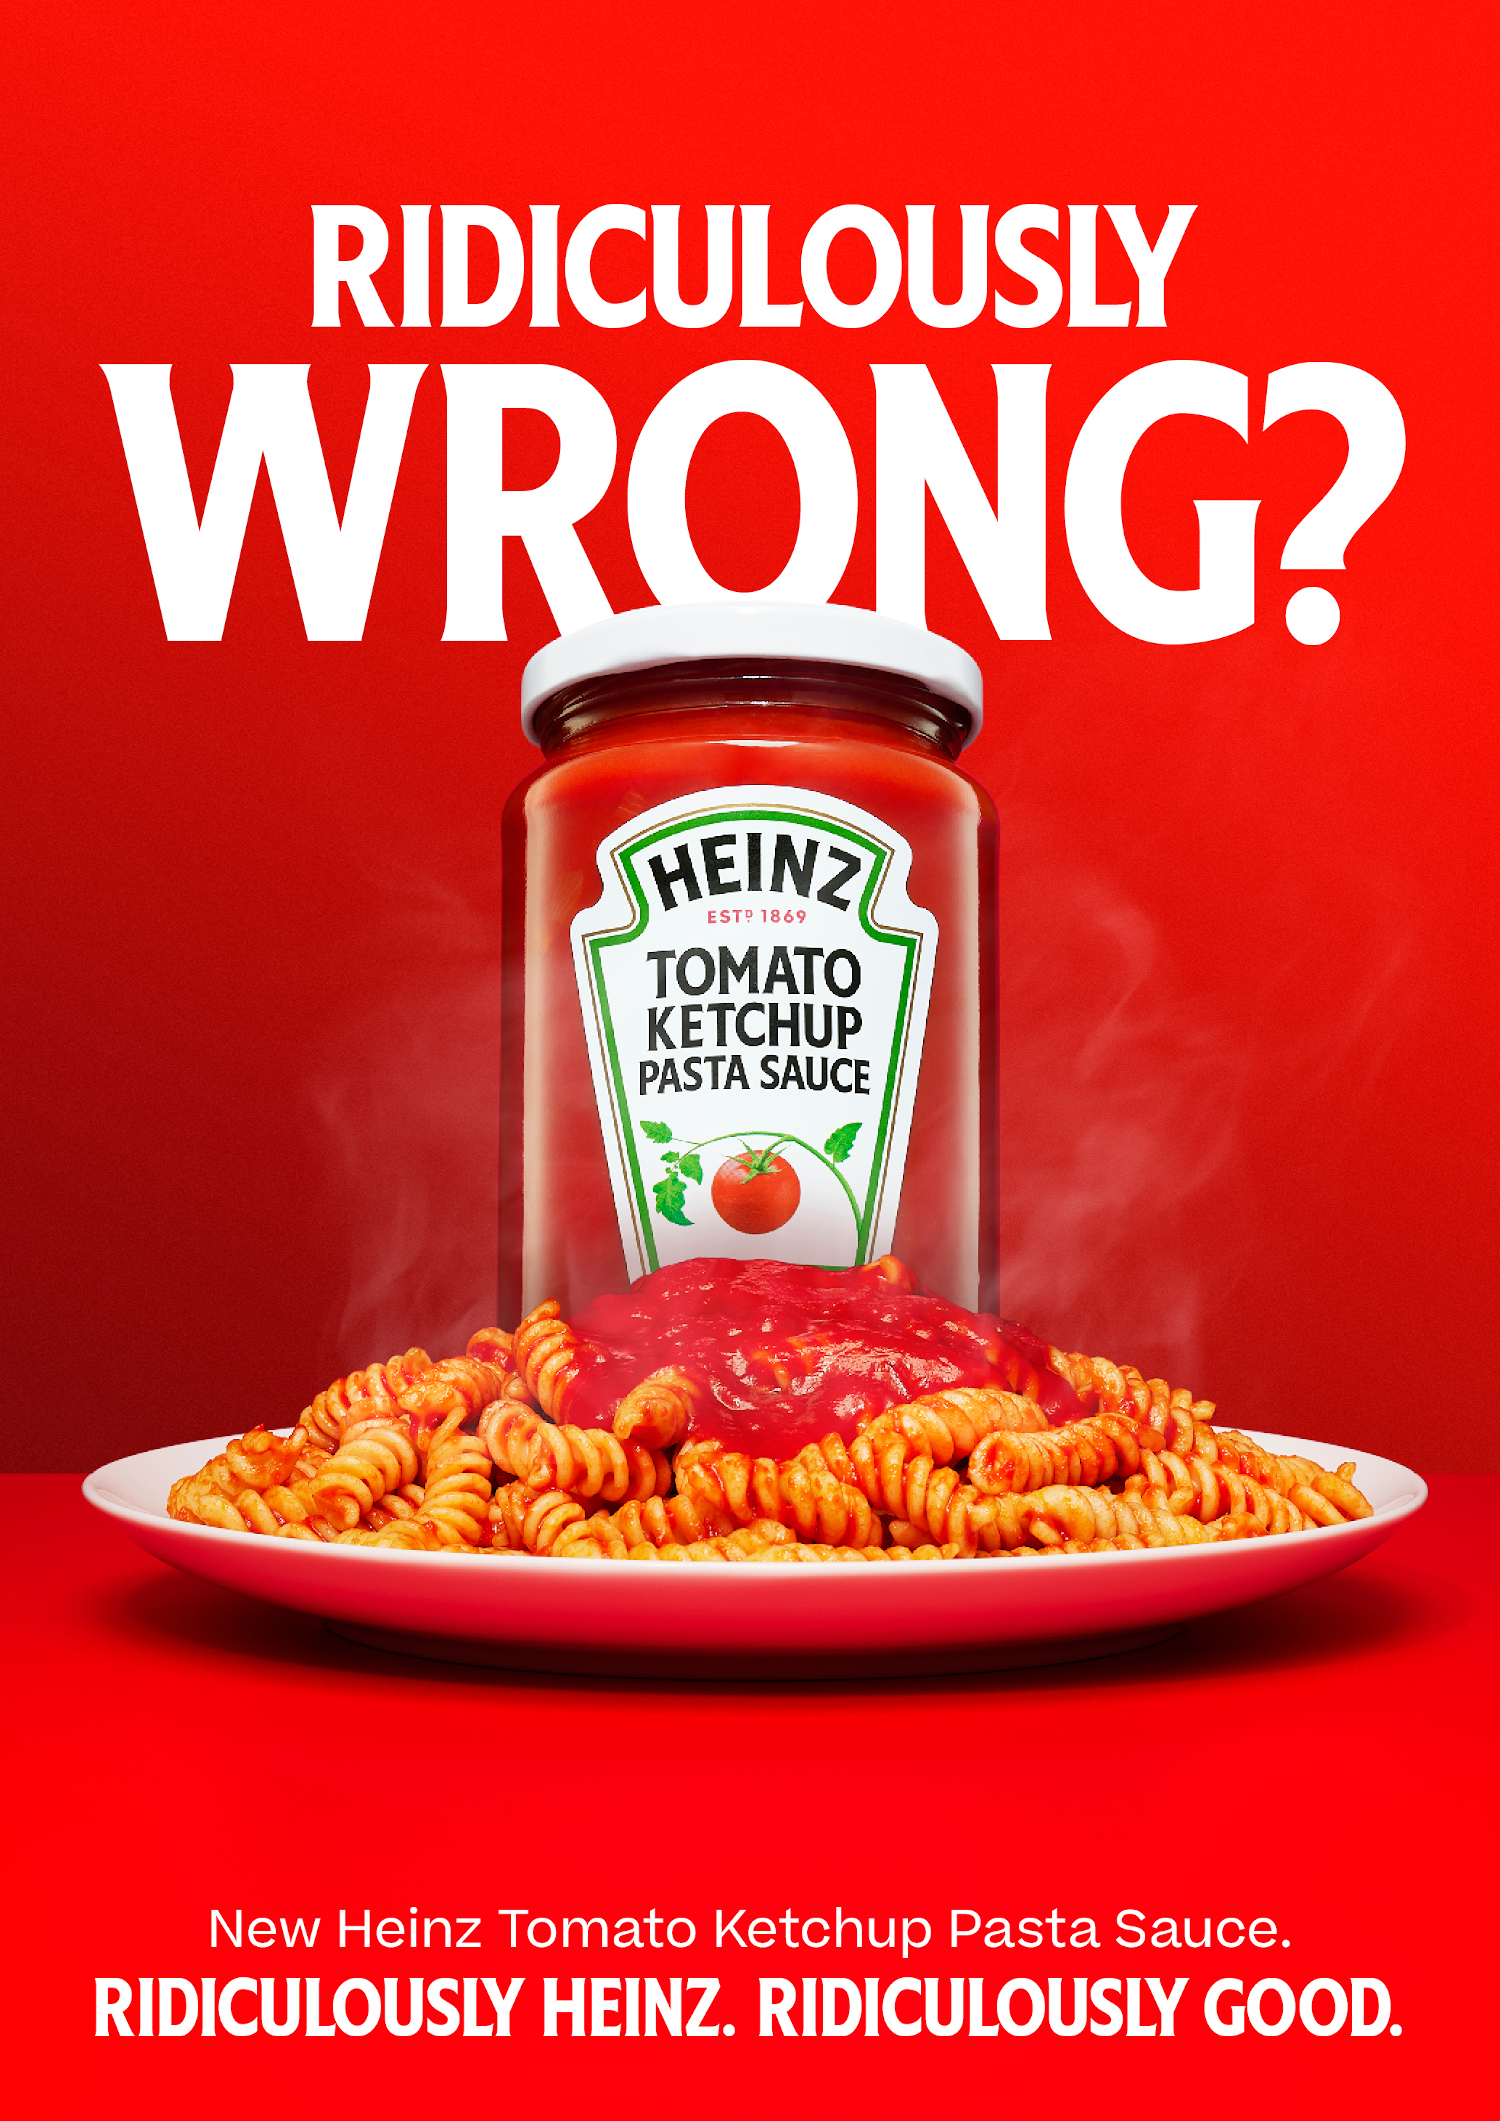 Heinz 2. Ridiculously wrong. Septiembre 2023